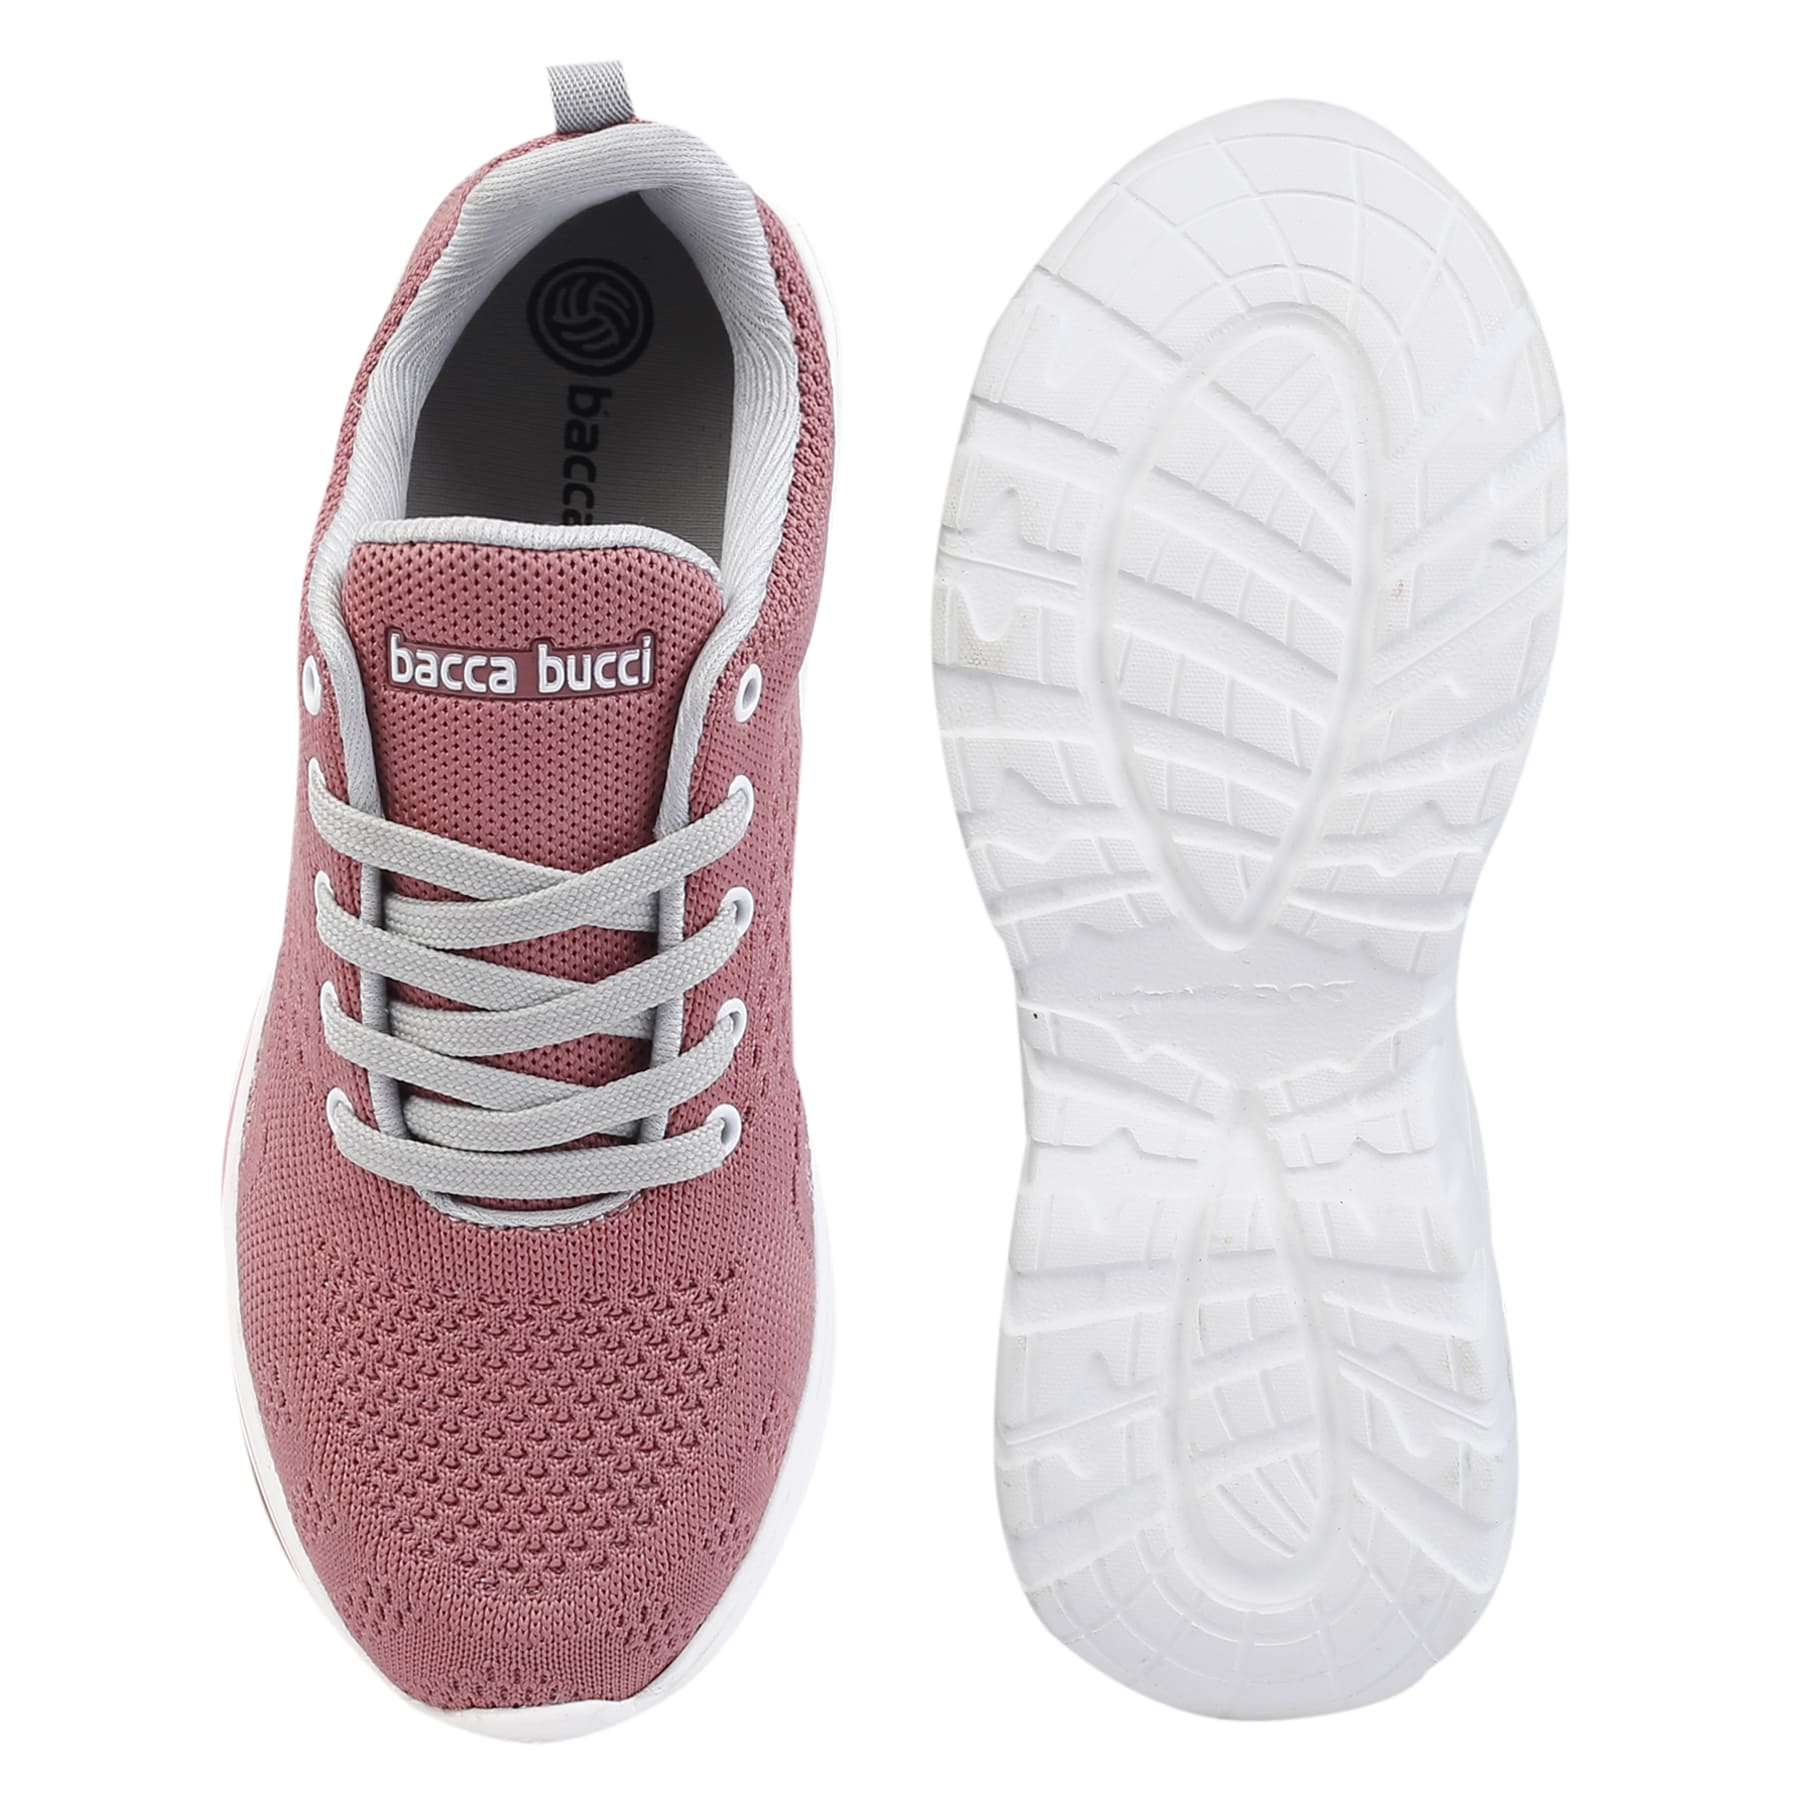 Bacca Bucci Women Running/Walking/Training Shoes with High Abrasion Rubber Outsole with Molded EVA Sockliner | Model Name: DETROIT